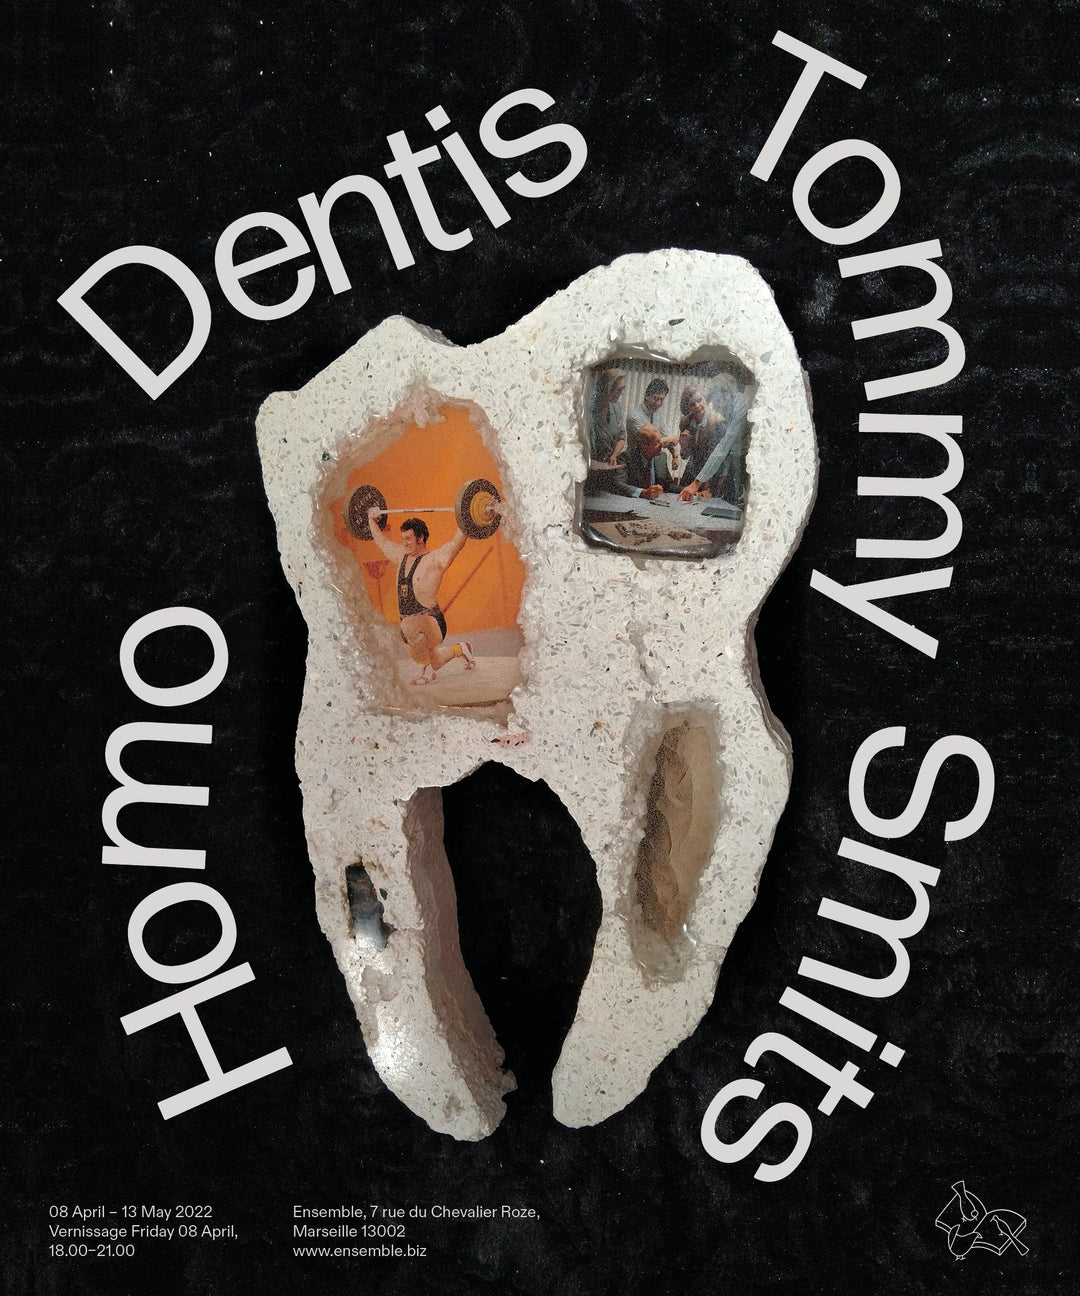 Tommy Smits – Éditions Homo Dentis